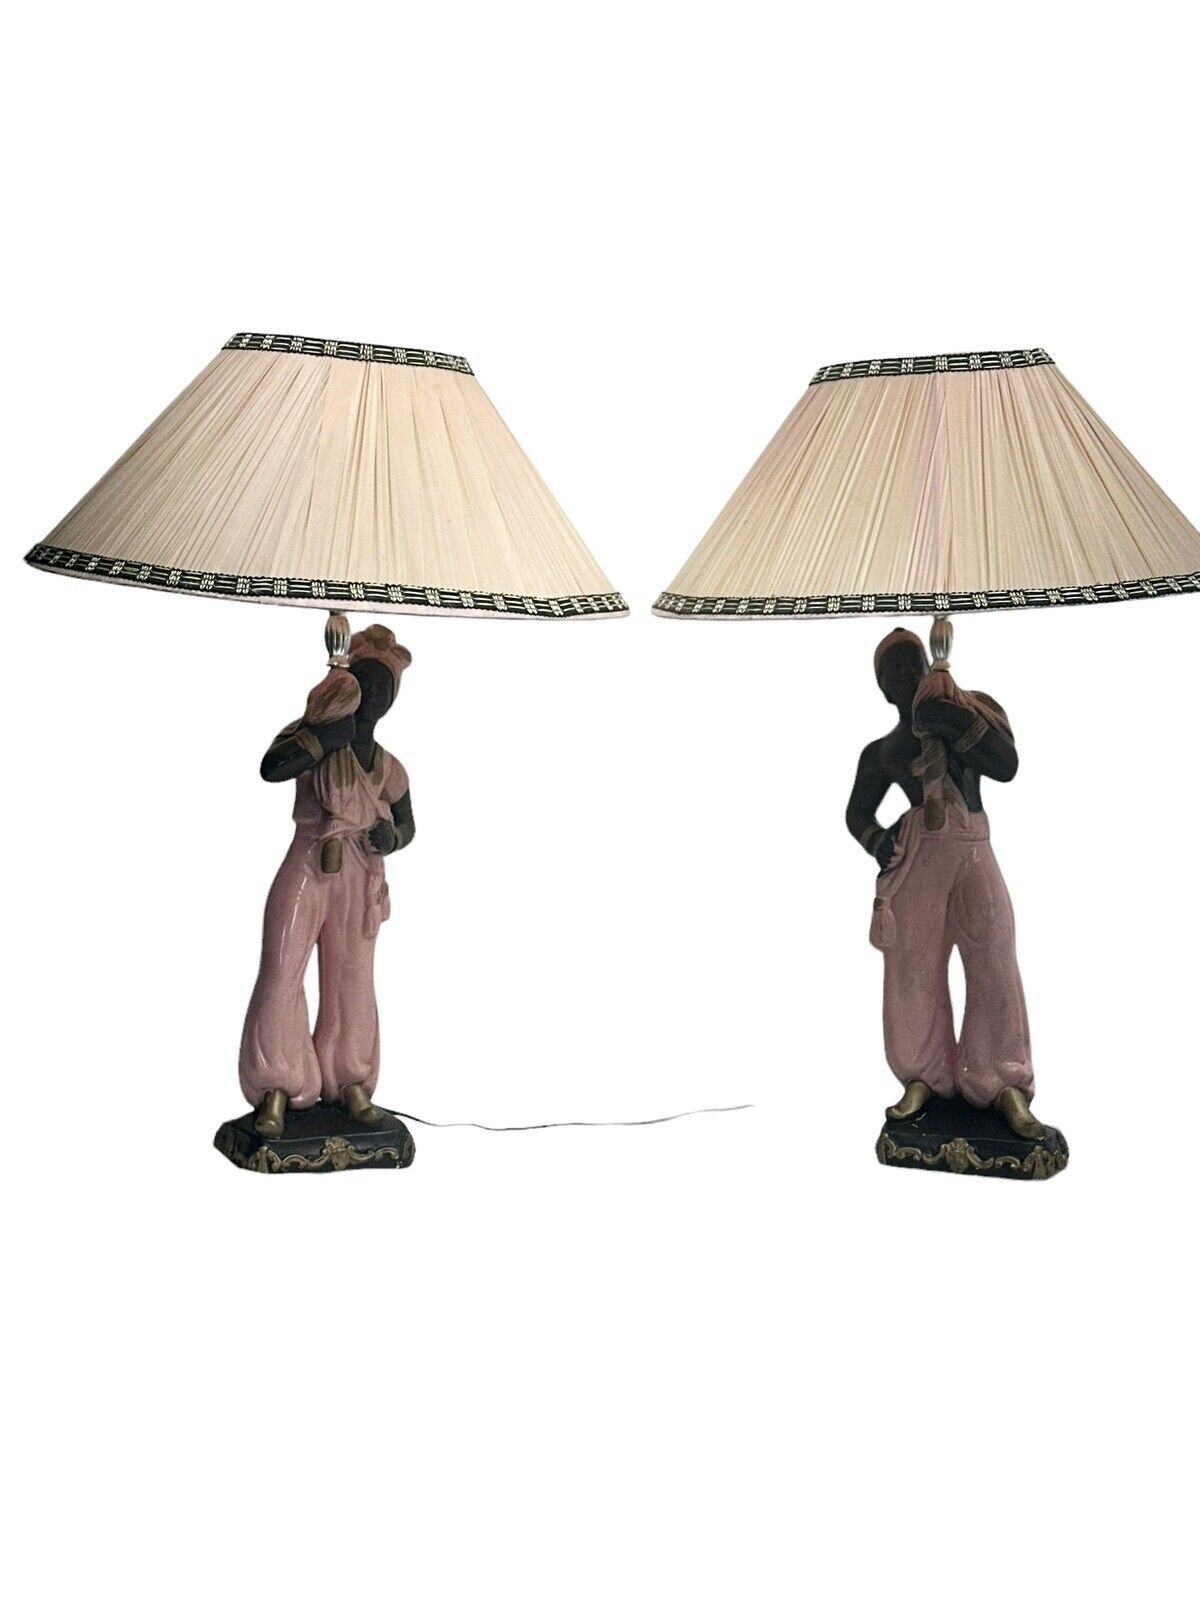 Rare New Old Stock Mcm Mid Century Pink Blackamoor Lamps Pair In Box